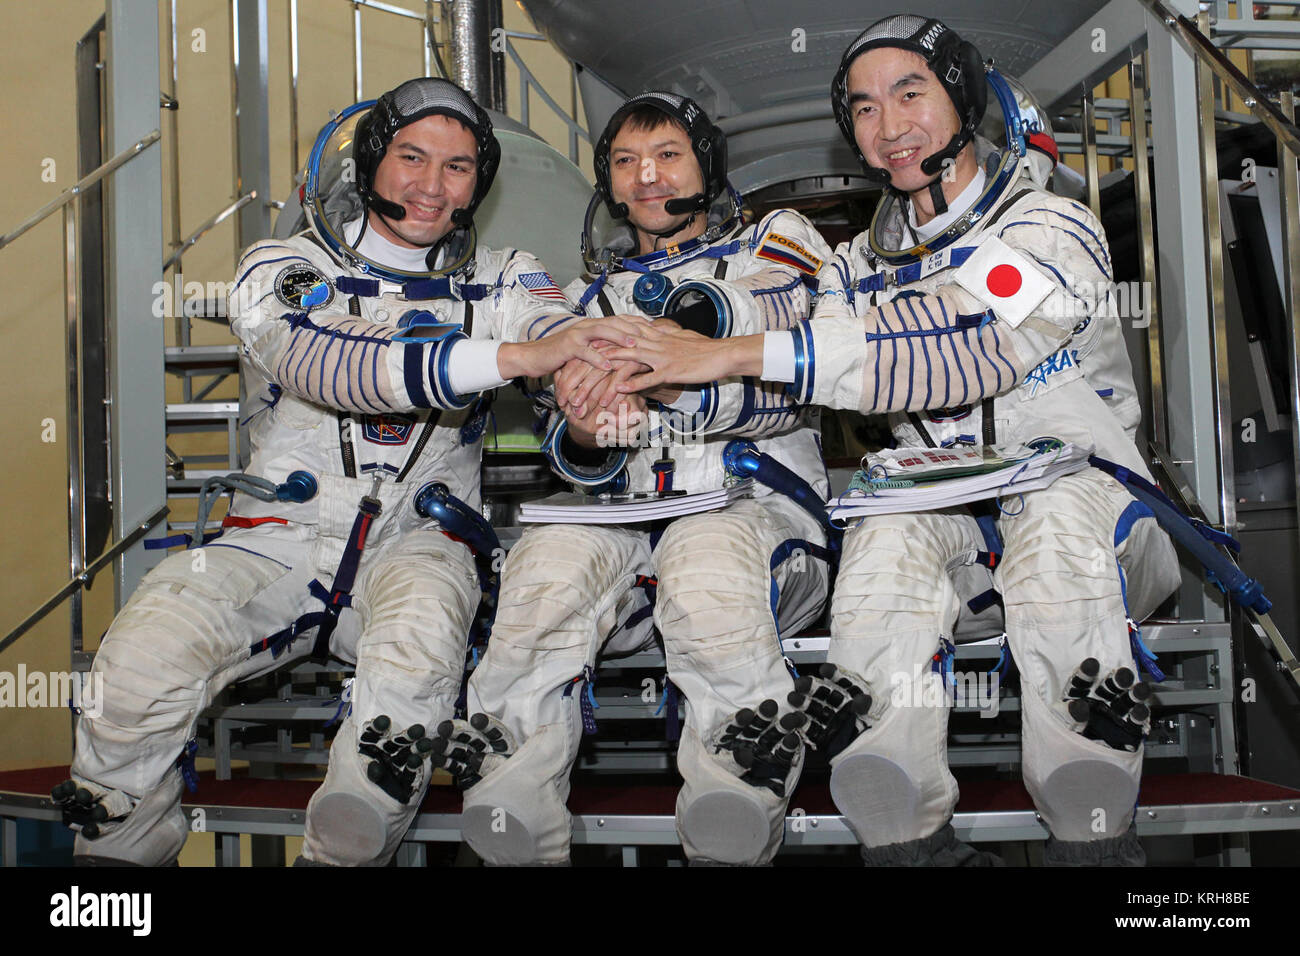 #3263 - (30 October 2014) --- At the Gagarin Cosmonaut Training Center in Star City, Russia, Expedition 42/43 backup crewmembers Kjell Lindgren of NASA (left), Soyuz Commander Oleg Kononenko of the Russian Federal Space Agency (Roscosmos, center) and Kimiya Yui of the Japan Aerospace Exploration Agency (right) pose for pictures in front of a Soyuz simulator October 30 as part of their final qualification exams for flight. They are the backups to the prime crew --- Terry Virts of NASA, Anton Shkaplerov of Roscosmos and Samantha Cristoforetti of the European Space Agency --- who are in the final Stock Photo